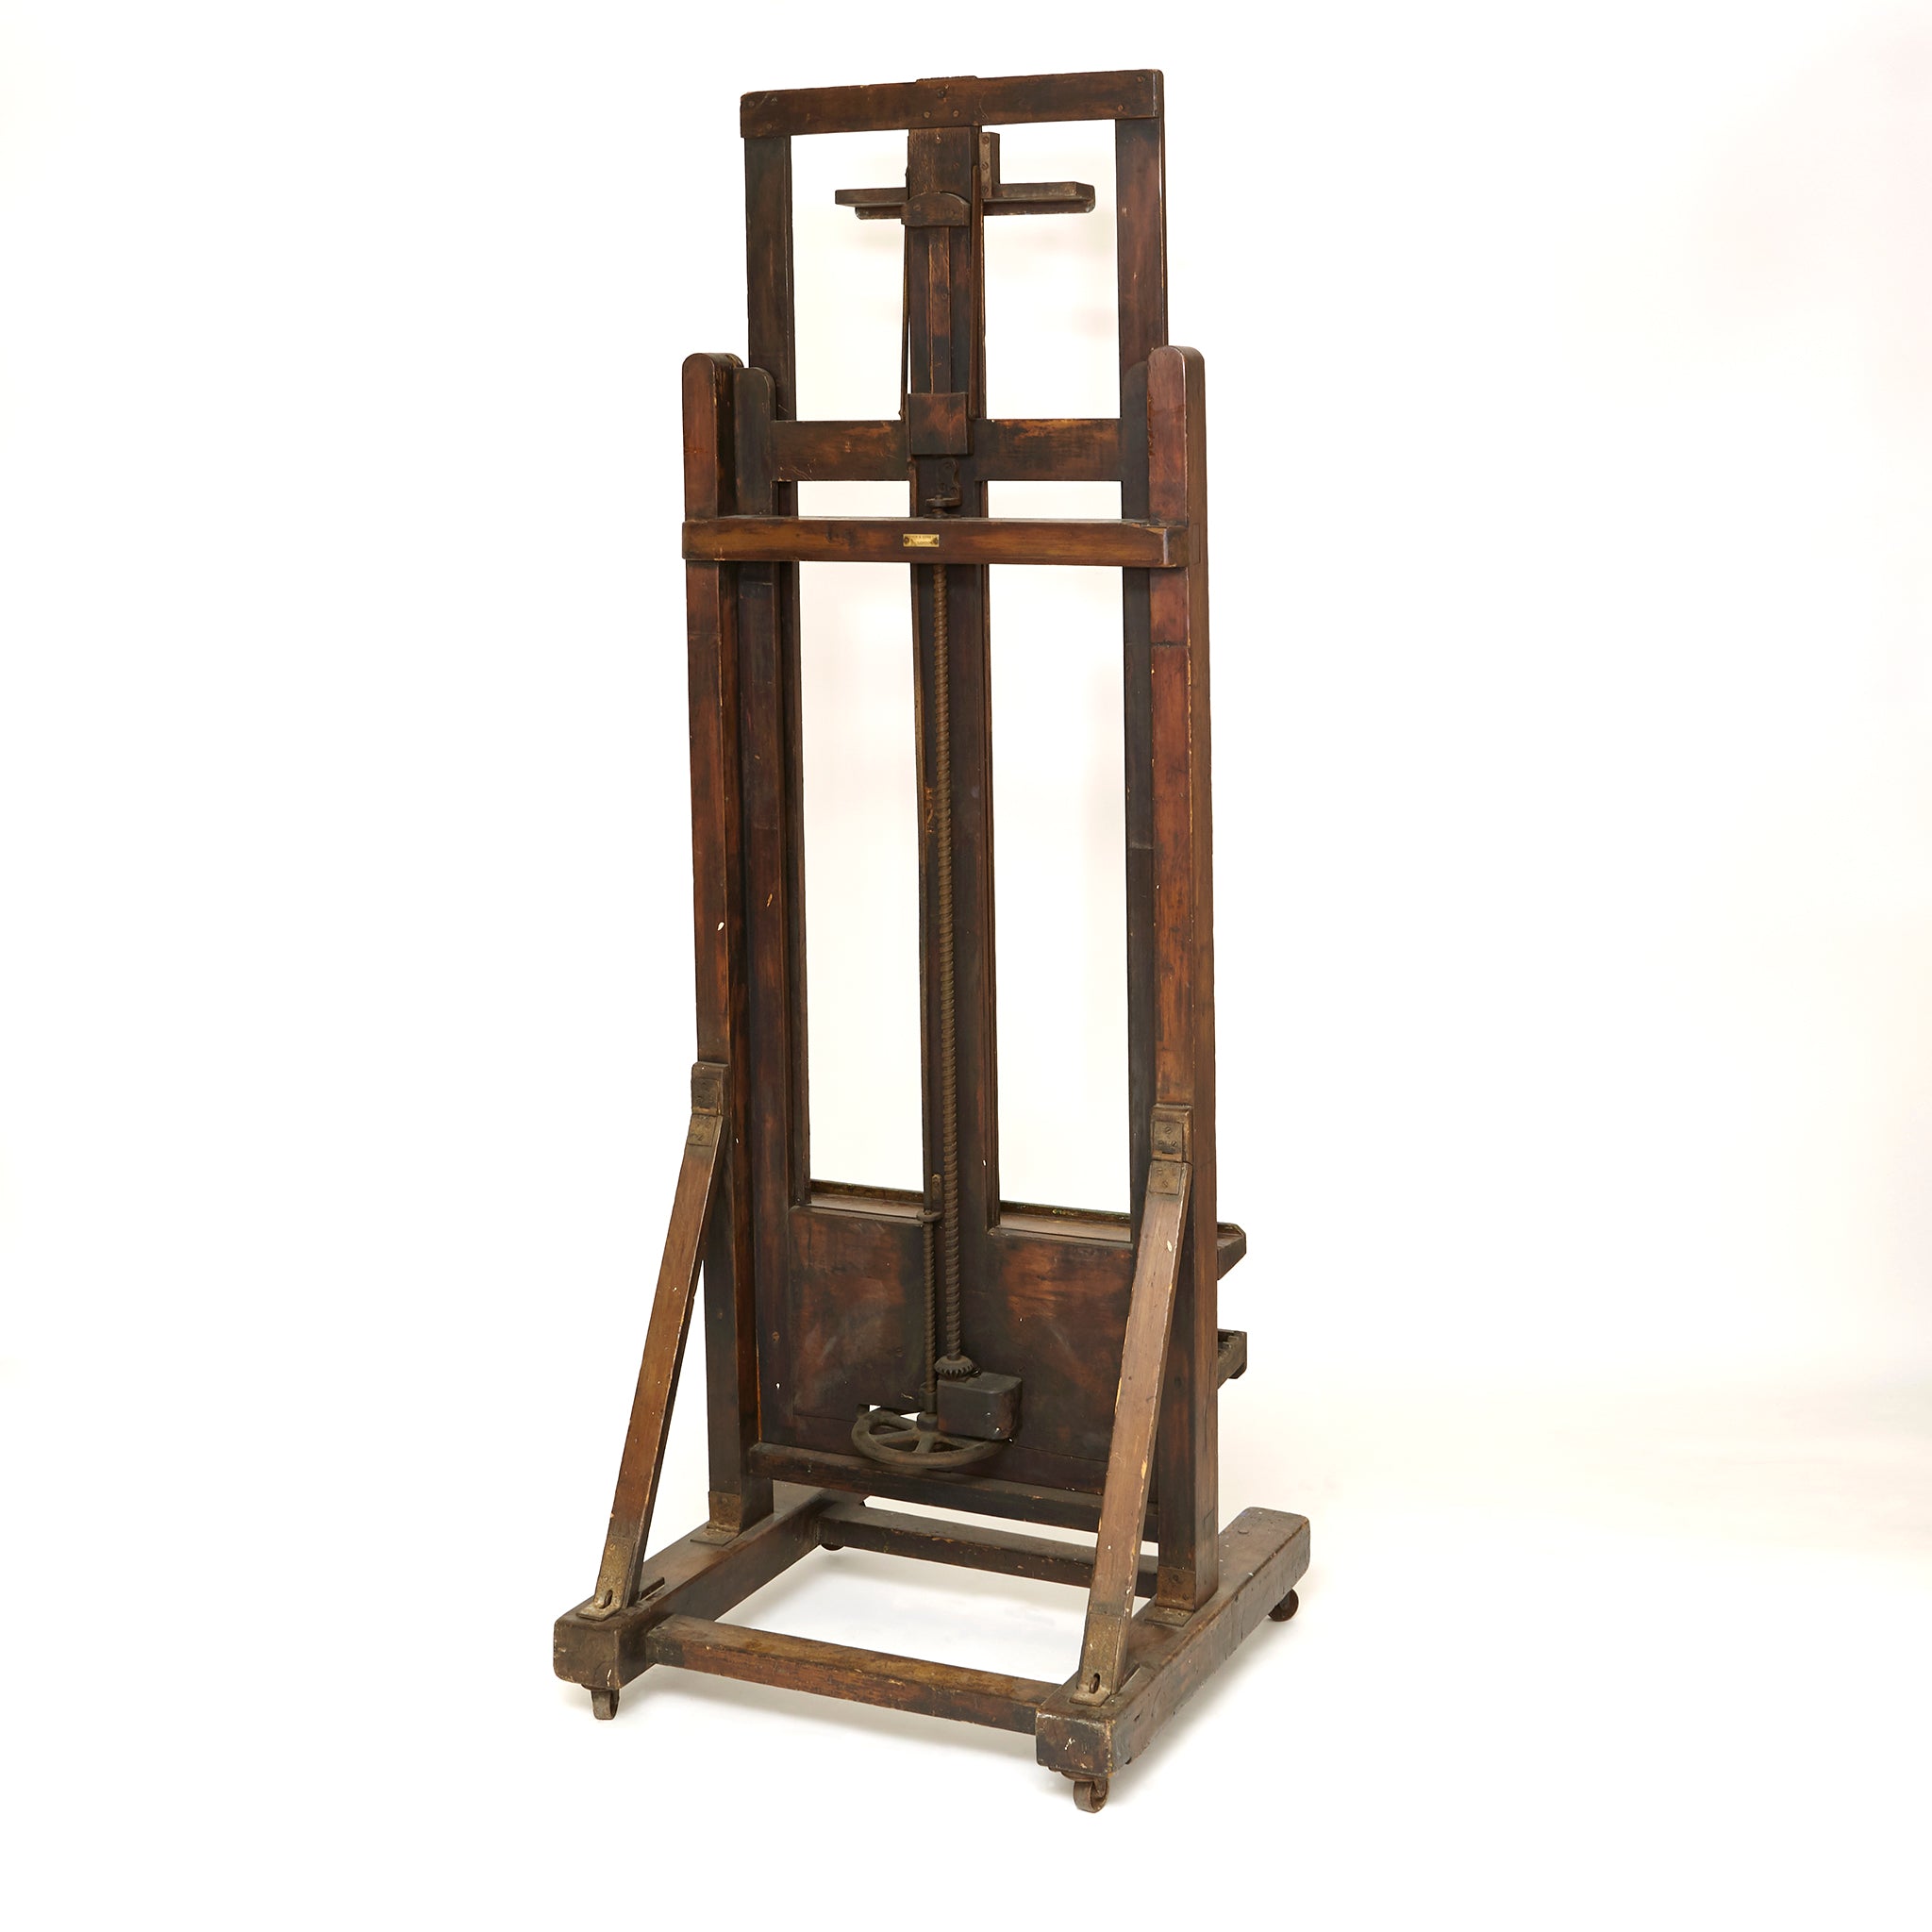 Large early twentieth century studio easel by Reeves and sons .